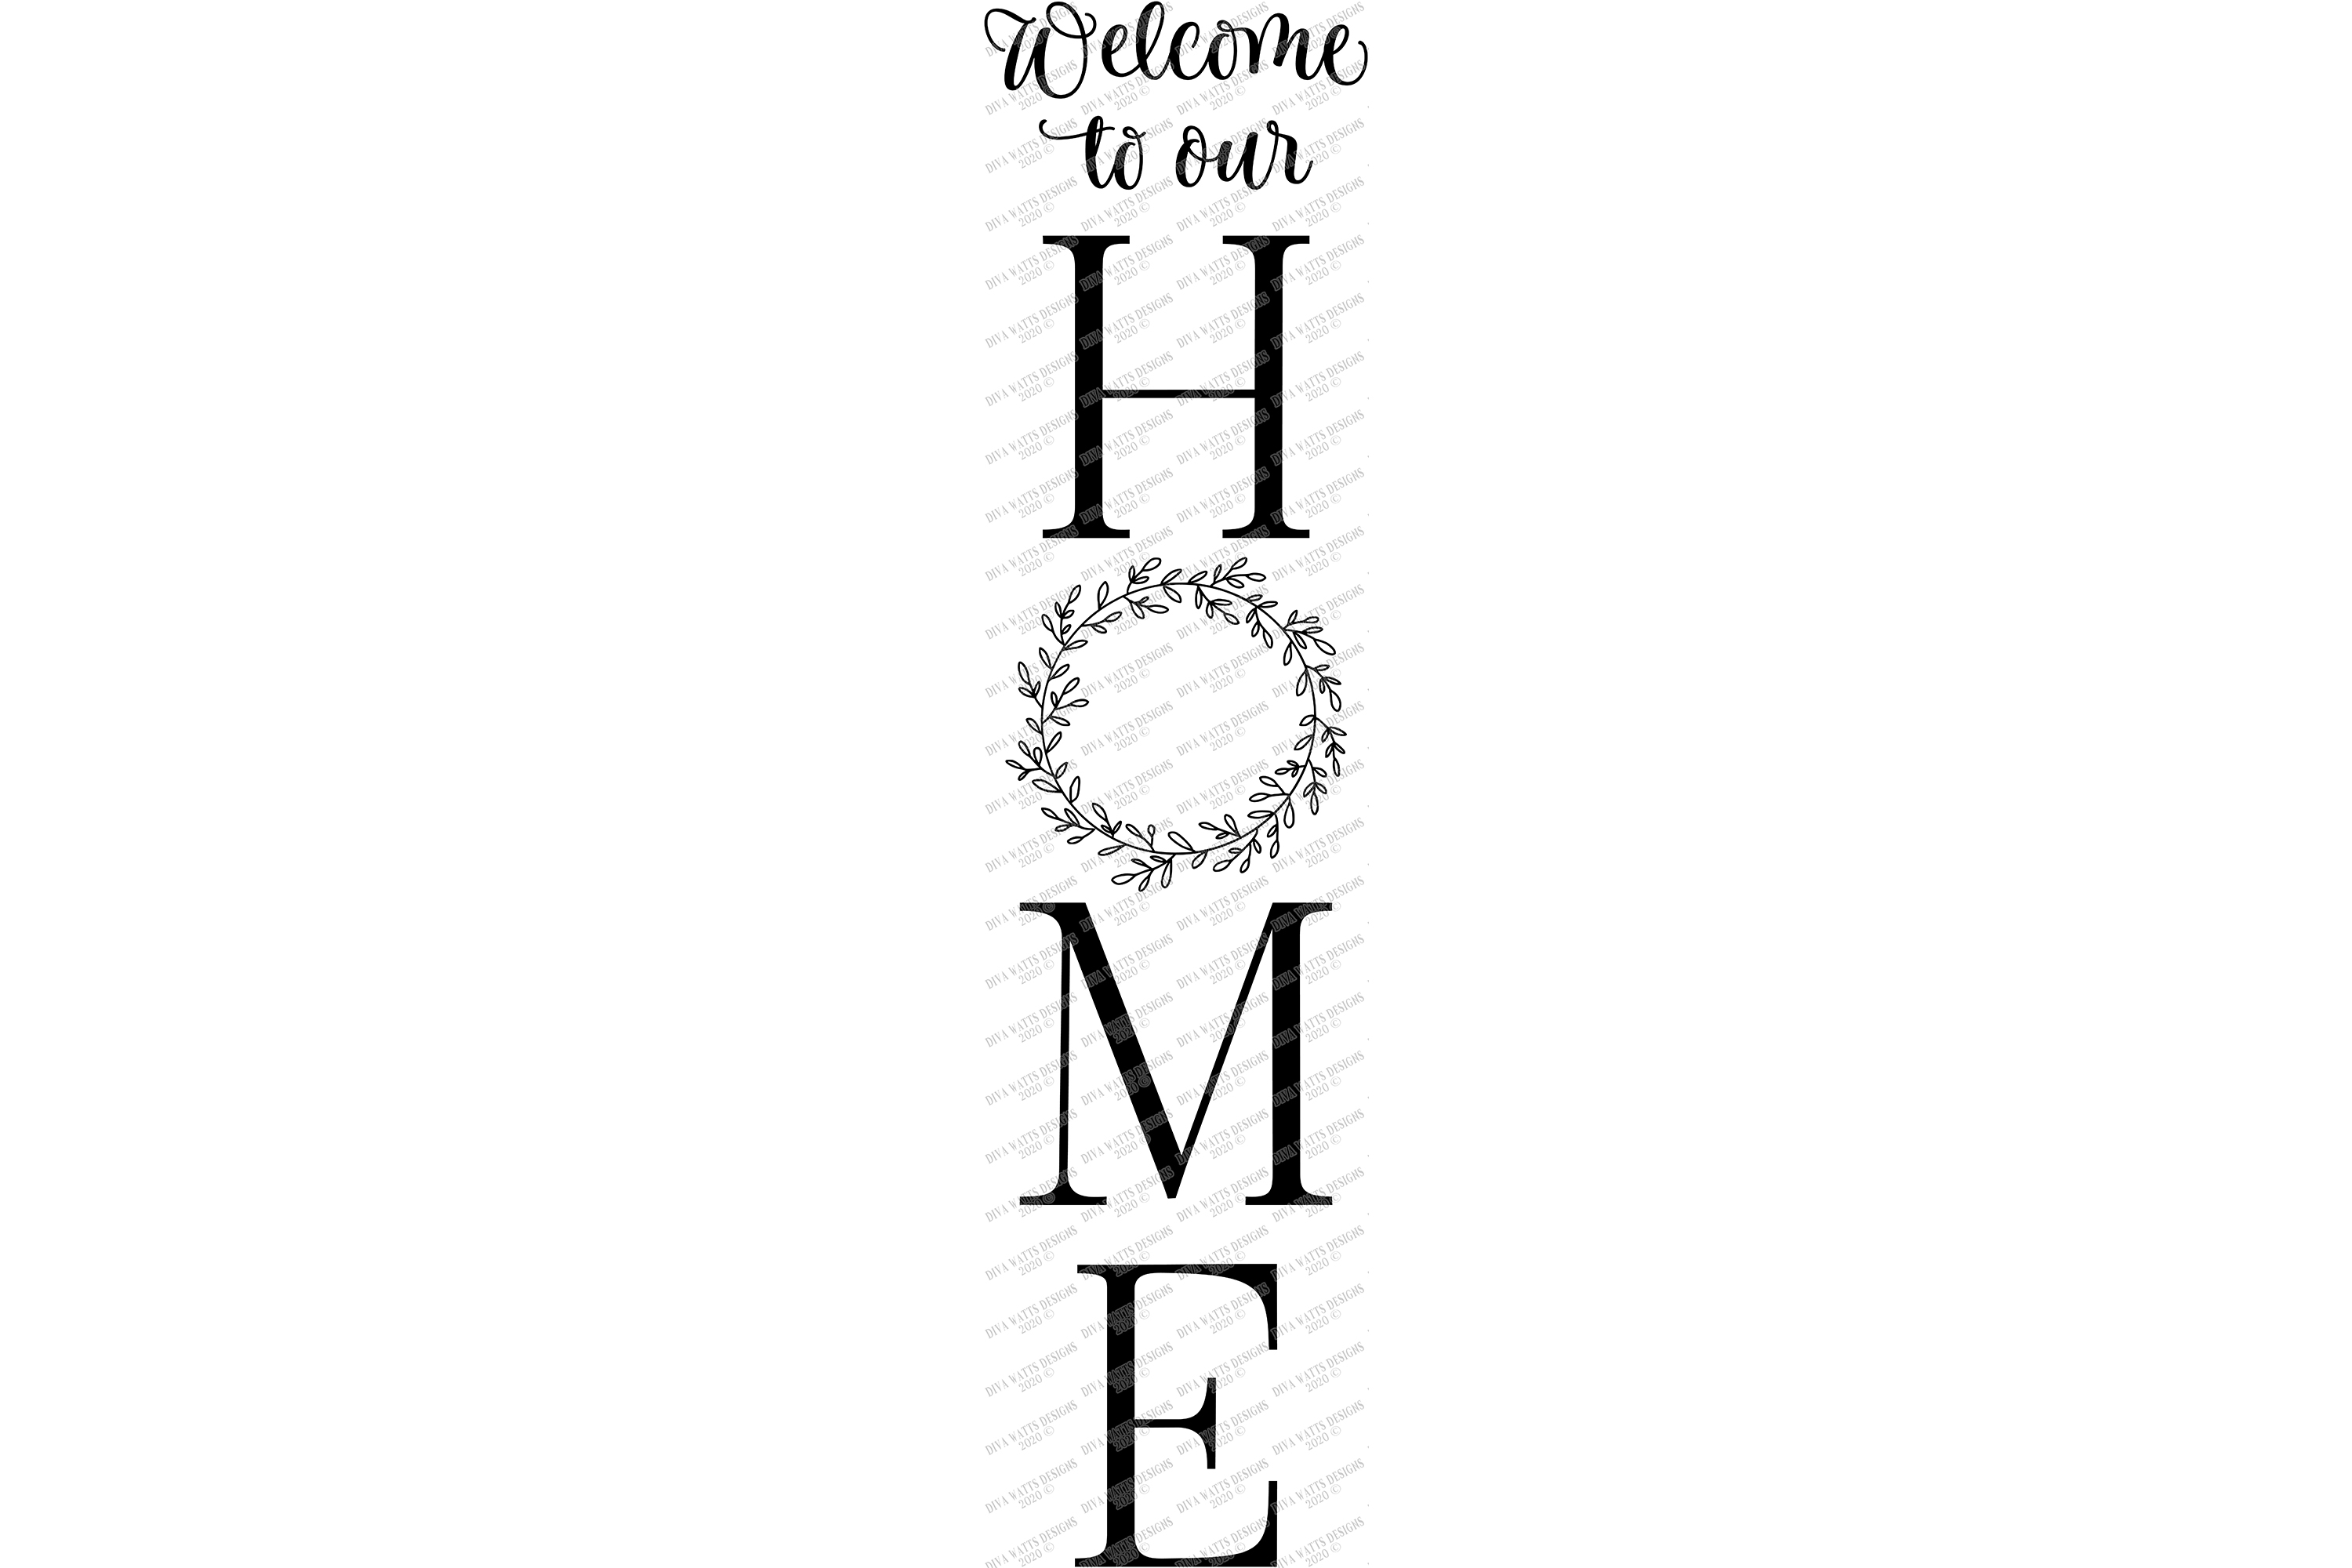 Download Welcome To Our Home - Vertical Farmhouse Sign - SVG EPS PNG